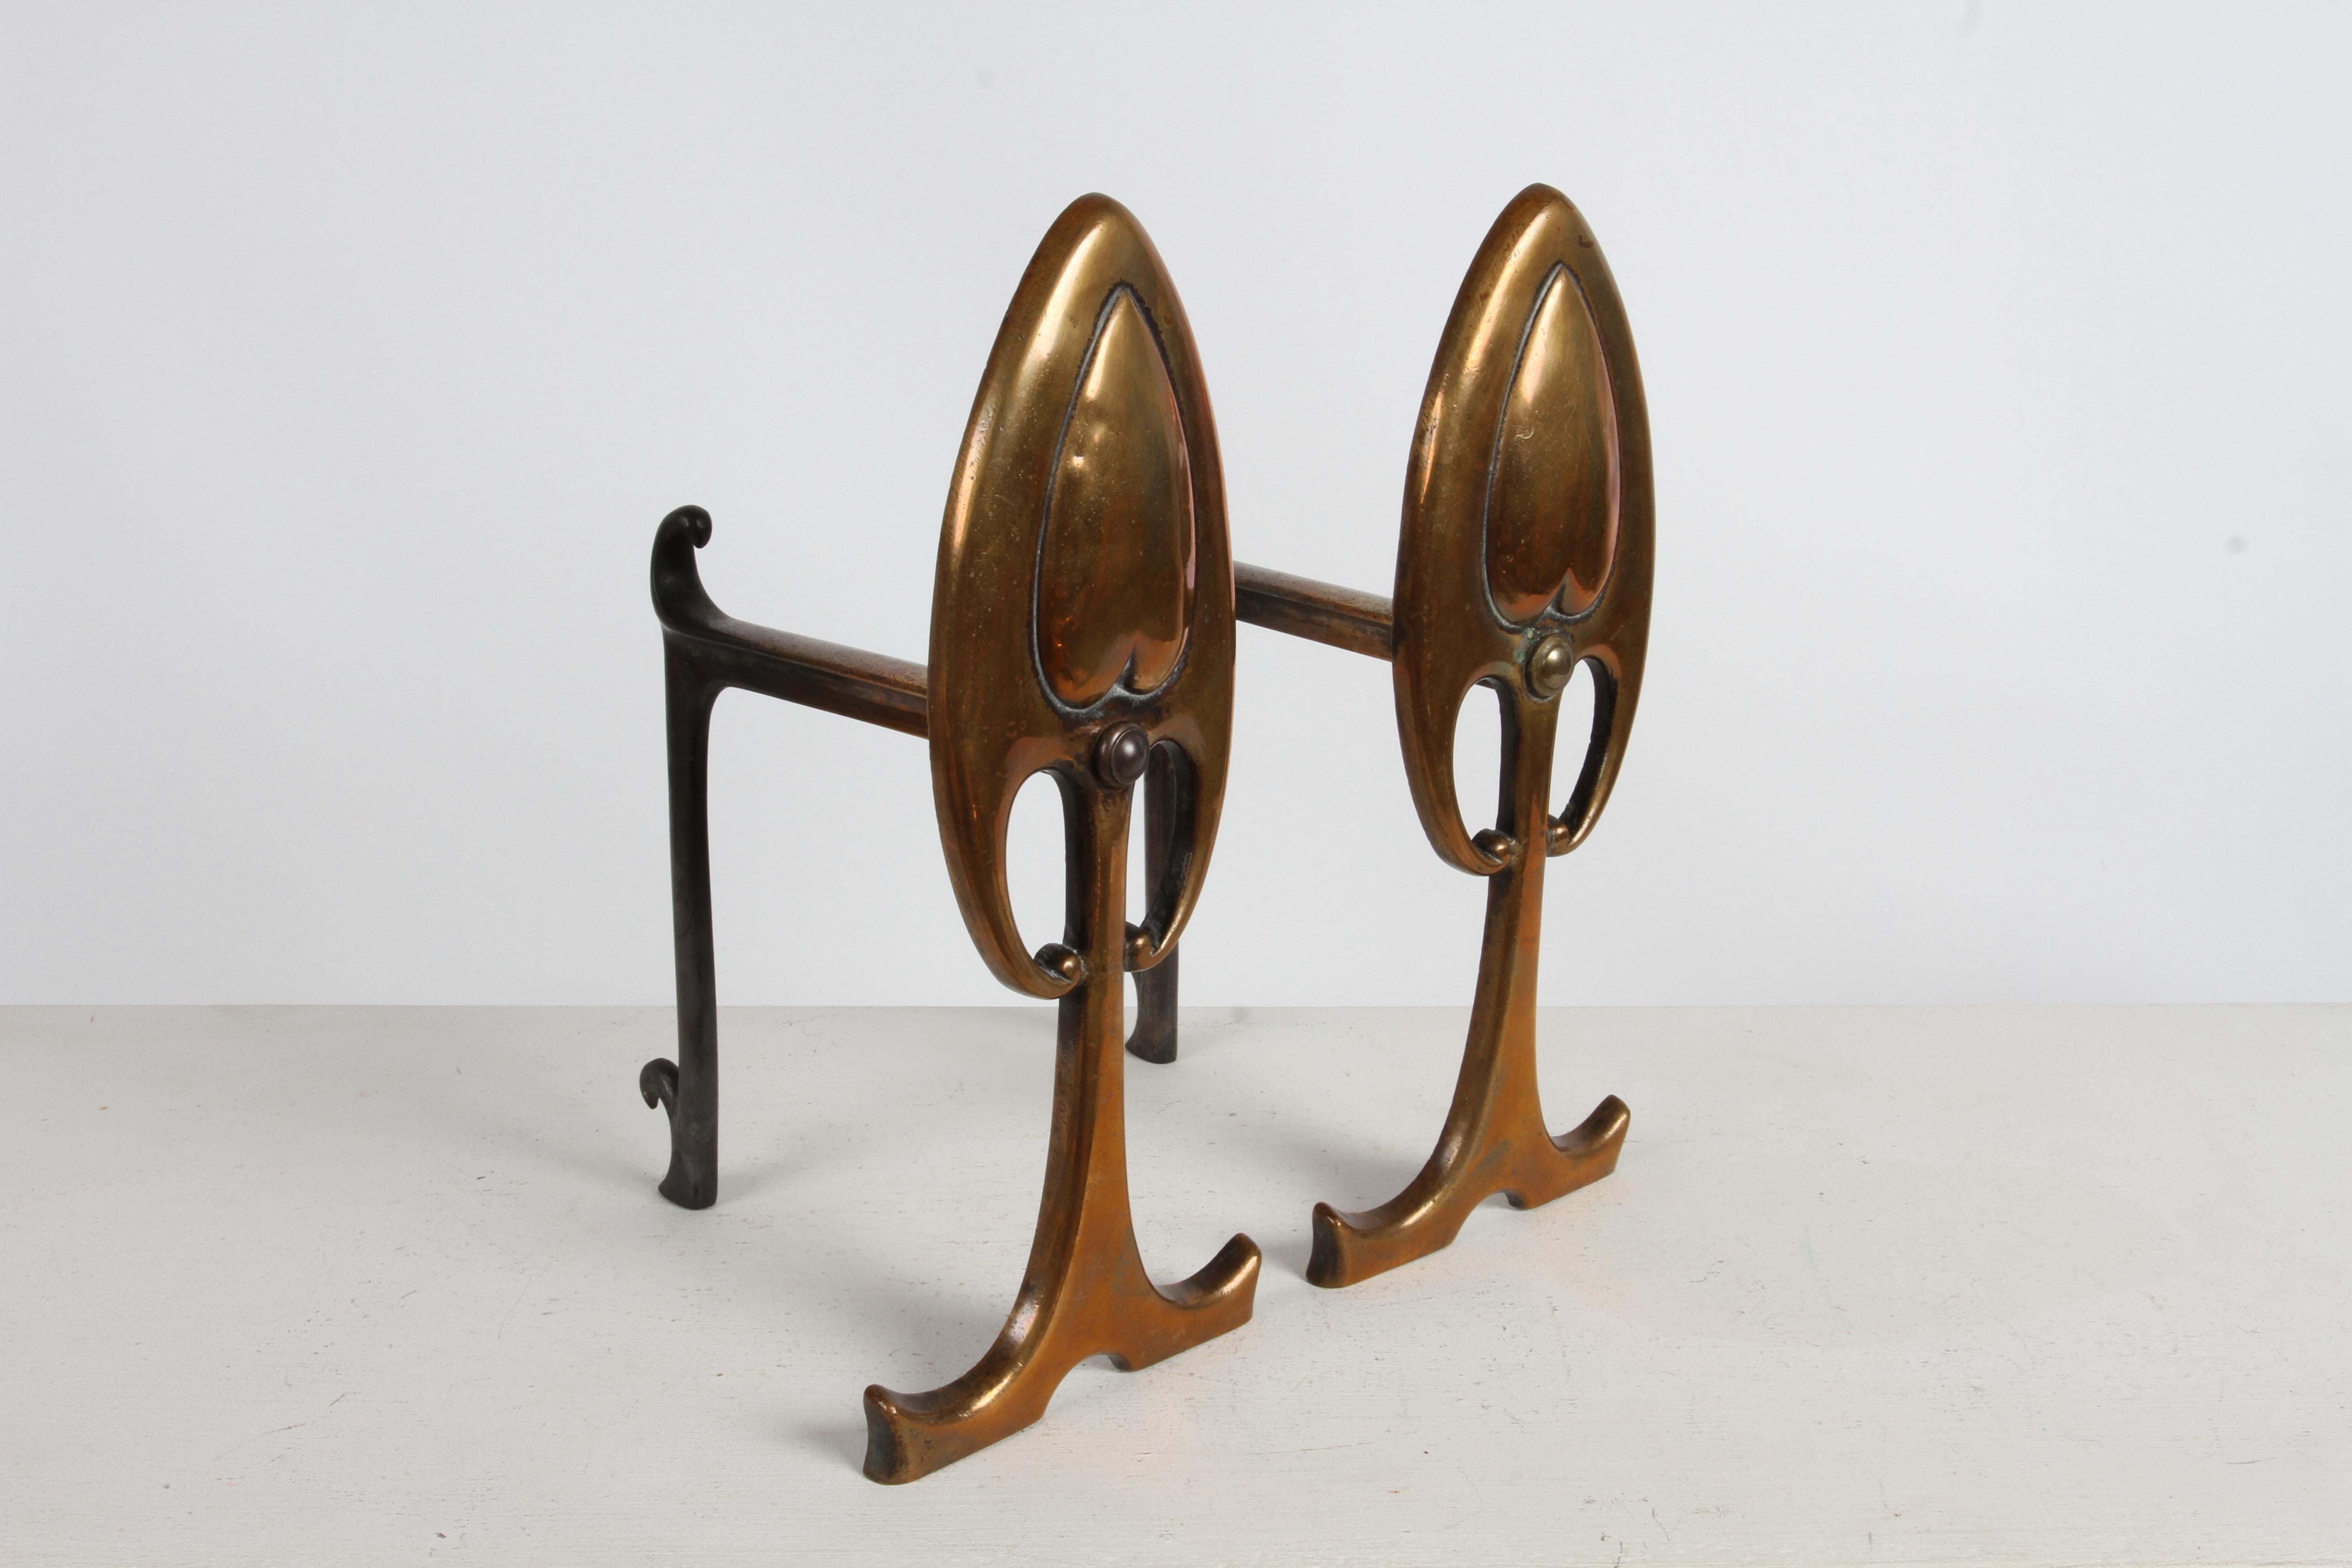 Art Nouveau or Aesthetic Movement Period Bronze Andirons - Firedogs in Repoussee In Good Condition For Sale In St. Louis, MO